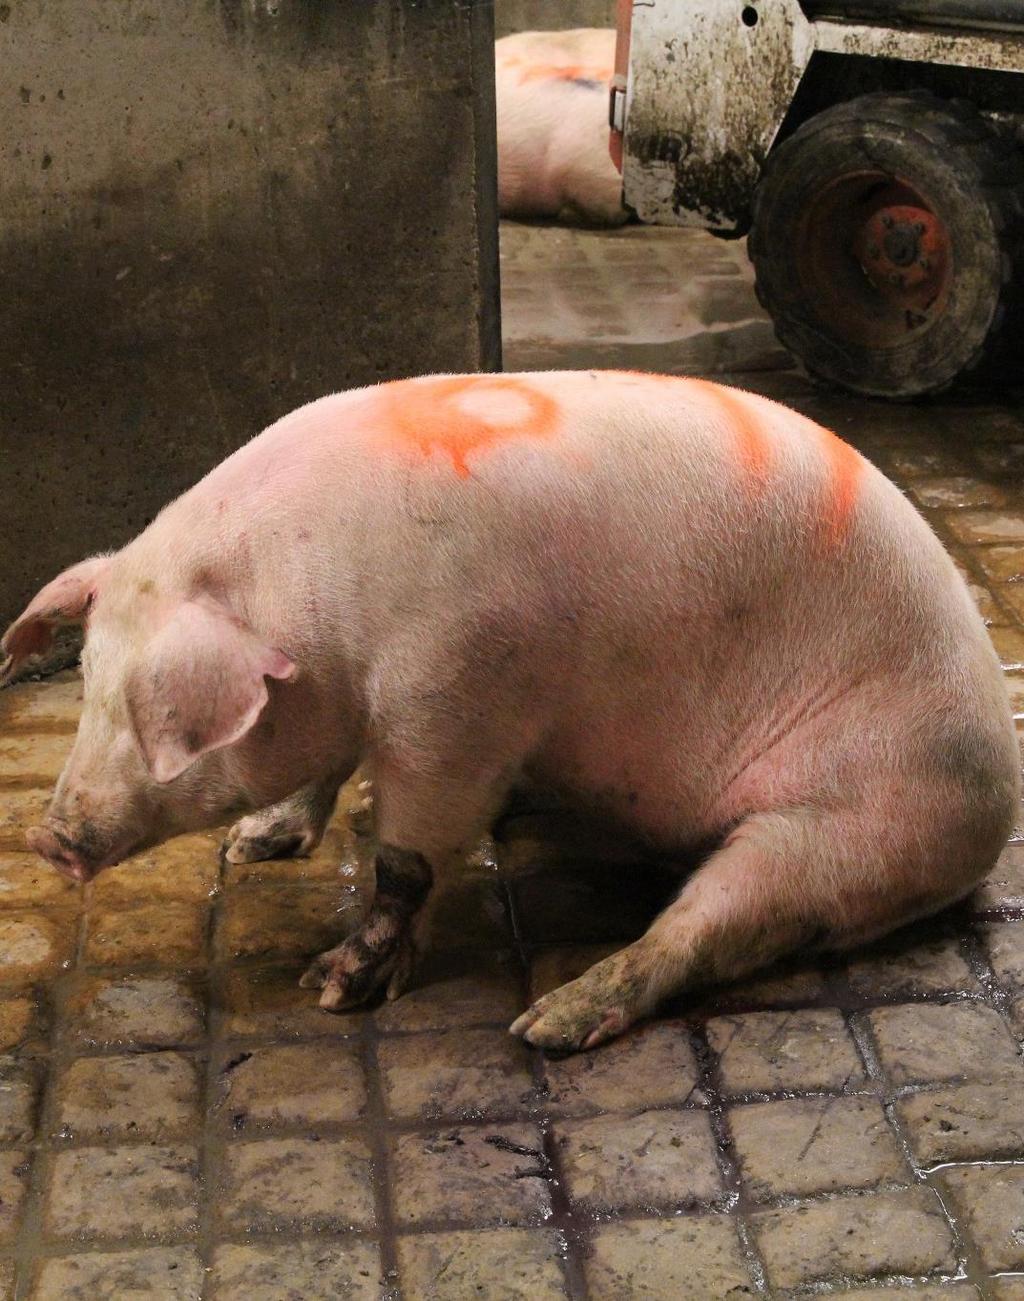 Non-Ambulatory Pig Pigs may become nonambulatory due to stress during loading combined with stress of transportation o Pig cannot keep up with the group o Pig cannot get up or stand on its own o Pig